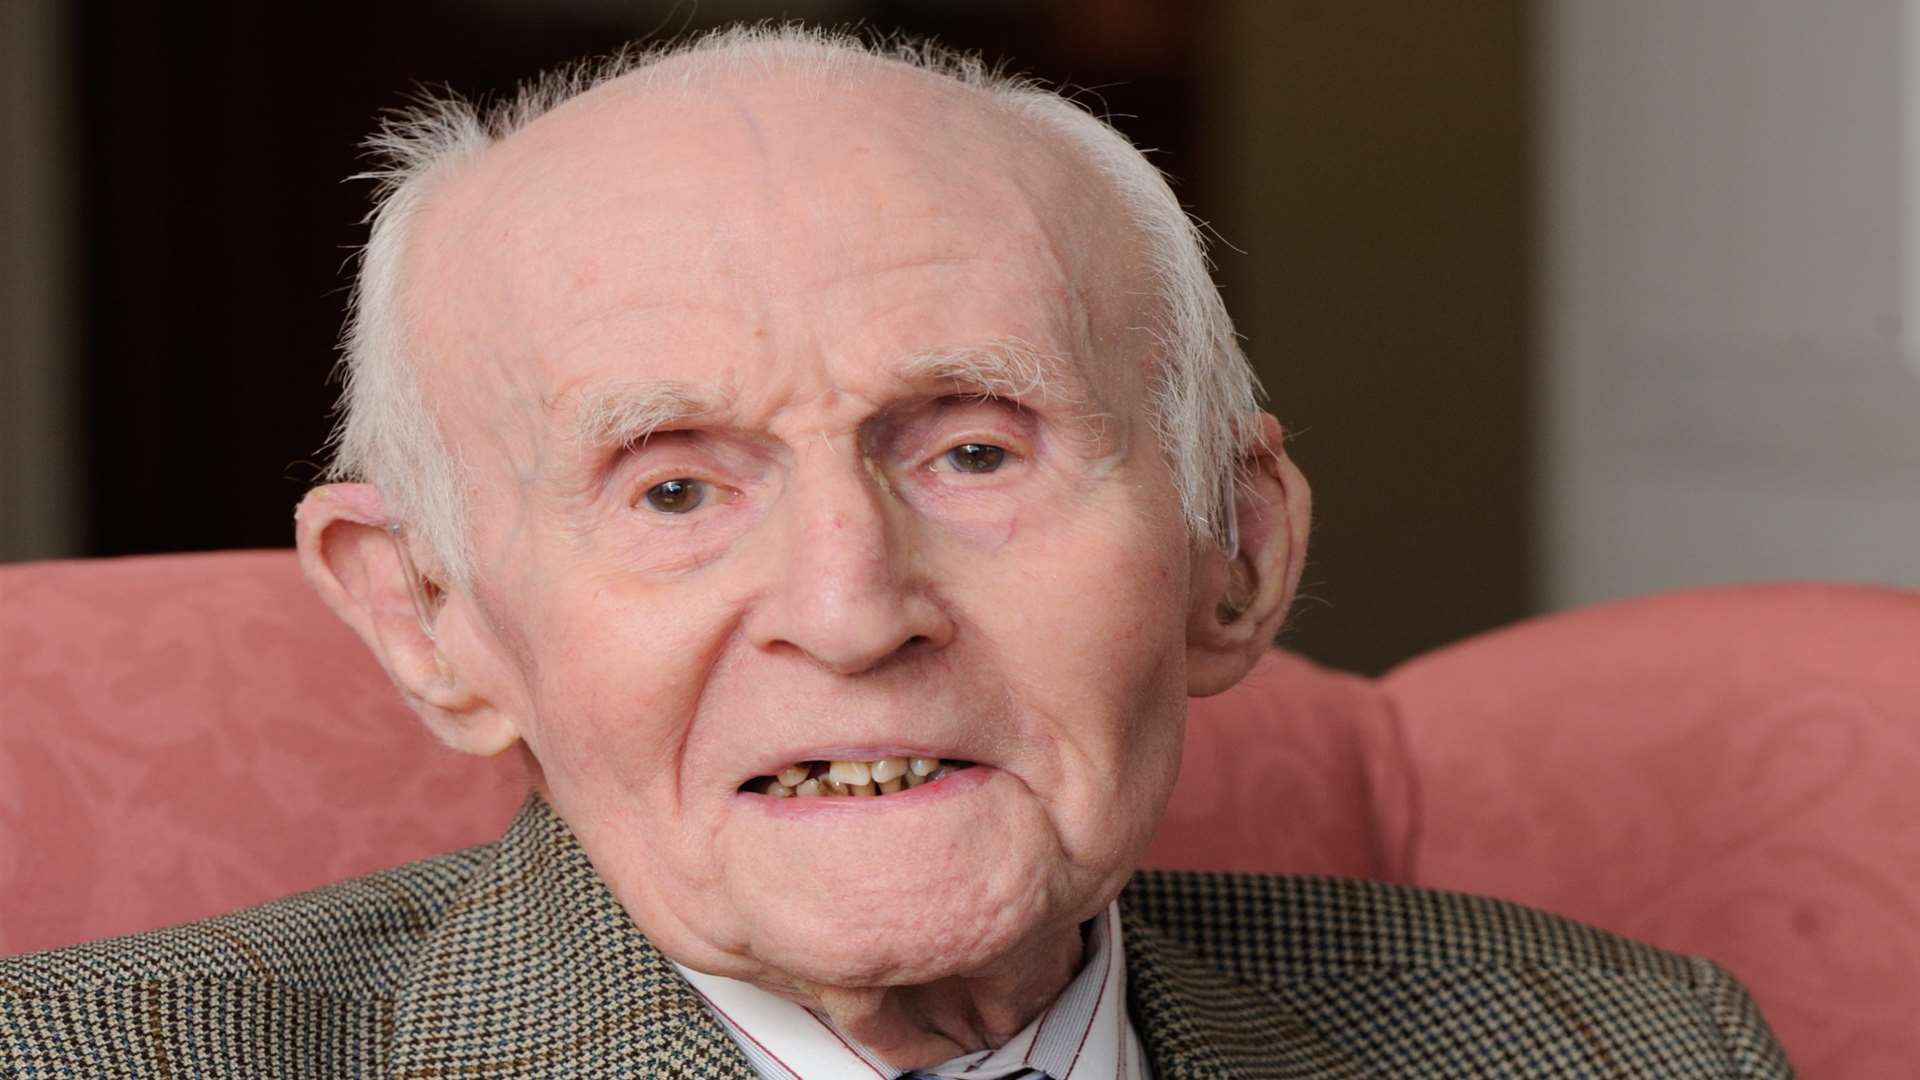 Thomas Frederick Rees celebrates his 100th Birthday on December 11, he was a headteacher in Dartford for many years.